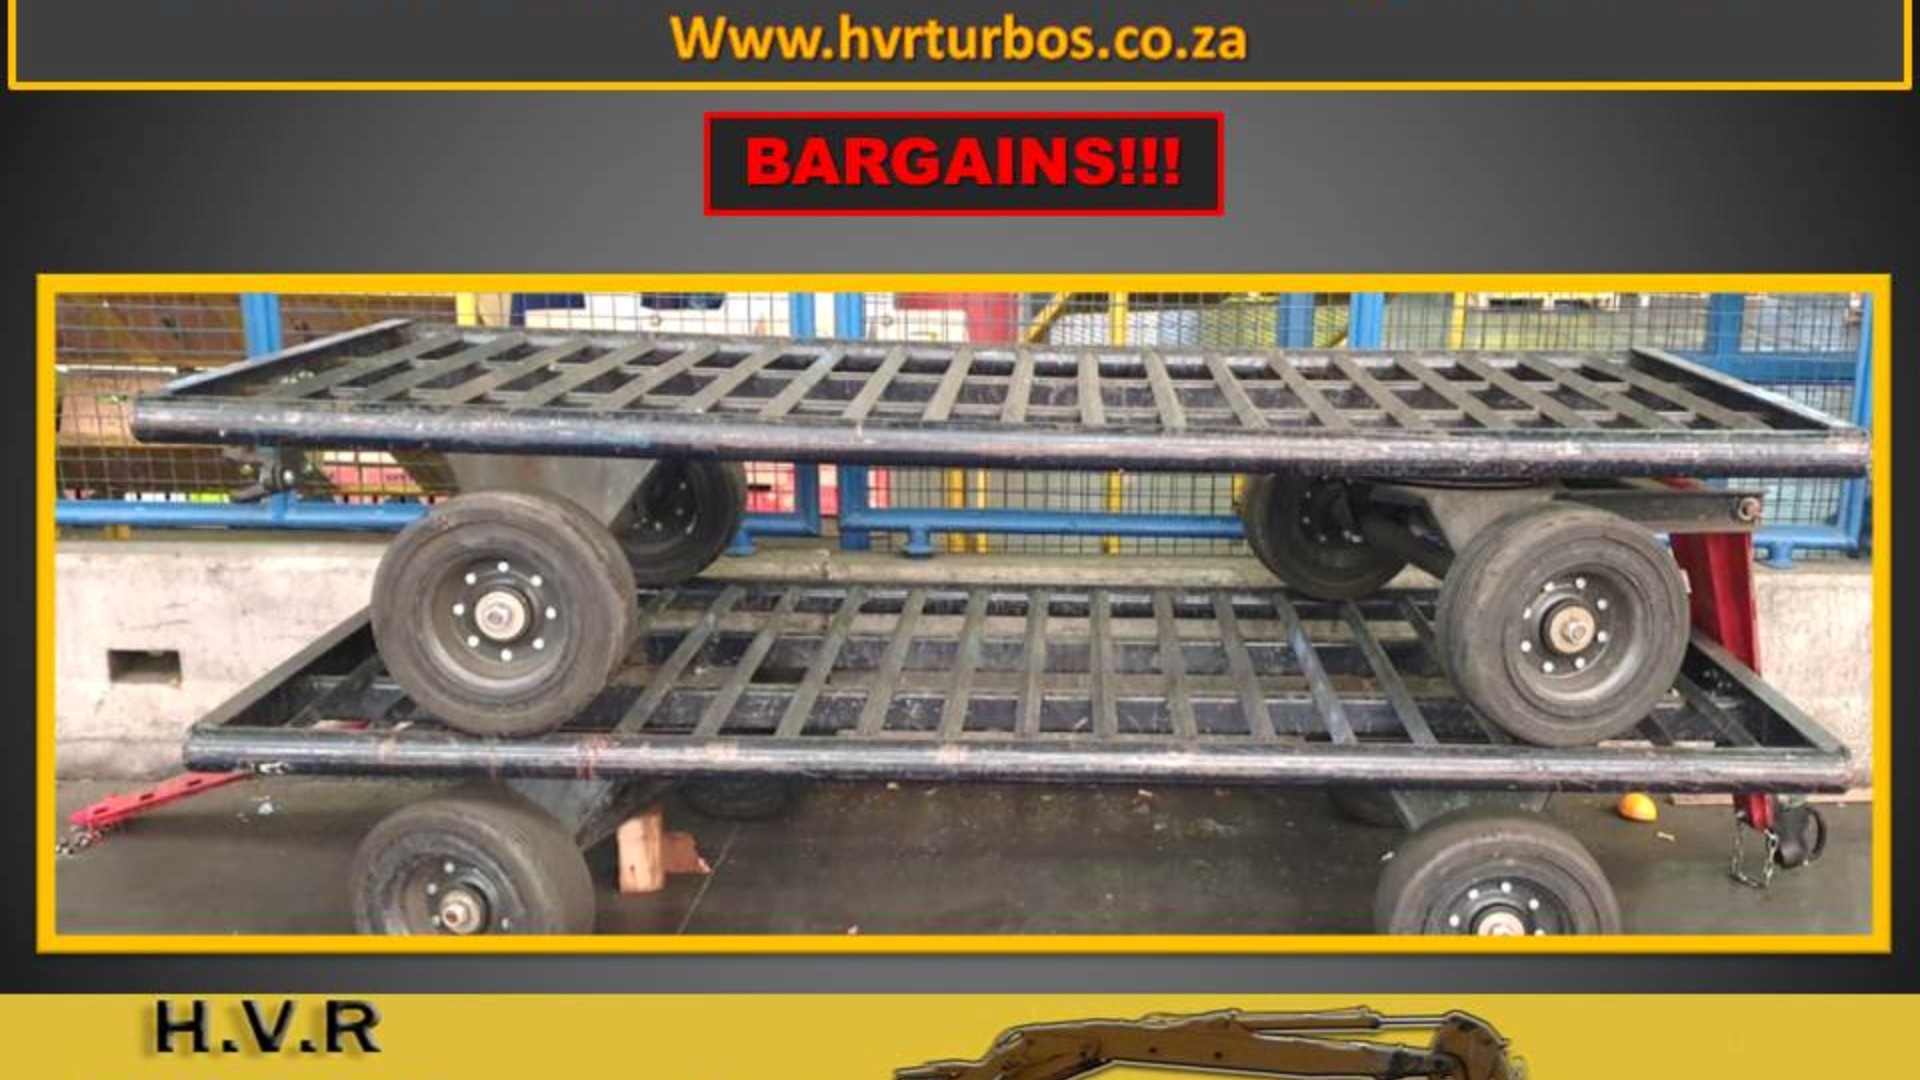 Trailers 2x Mark waentjies for sale by HVR Turbos  | Truck & Trailer Marketplaces